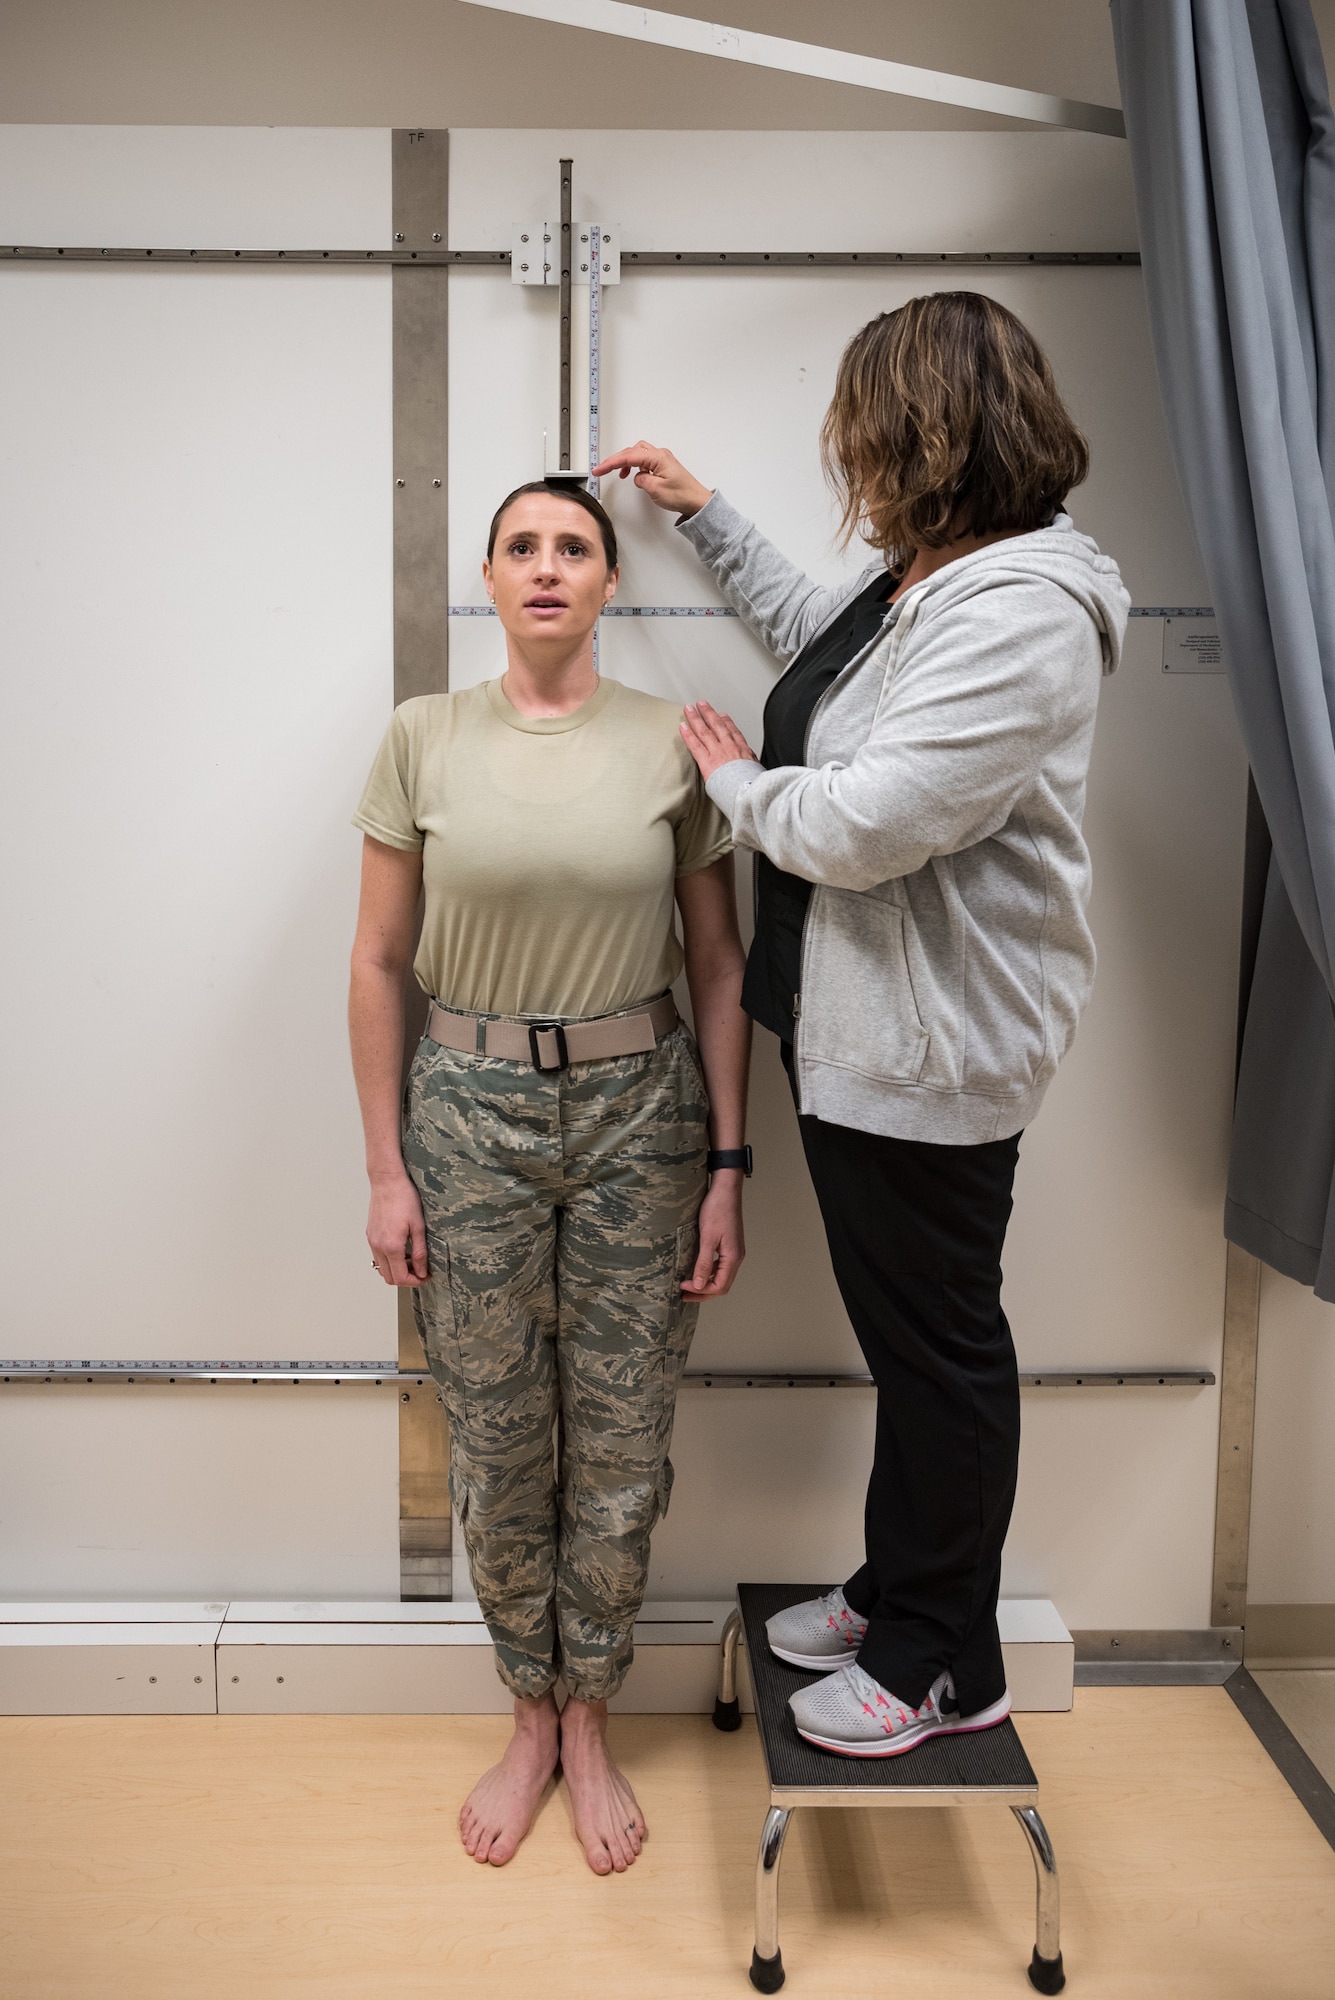 Jessica Barker, an aeromedical technician at the U.S. Air Force School of Aerospace Medicine, measures the standing height of a pilot candidate using the only official anthropometric device for measuring those who fall outside height standards. Seven measurements are collected and uploaded into a waiver system to determine if height for each candidate is truly an eliminating factor to fly manned aircraft. (U.S. Air Force photo by Richard Eldridge)